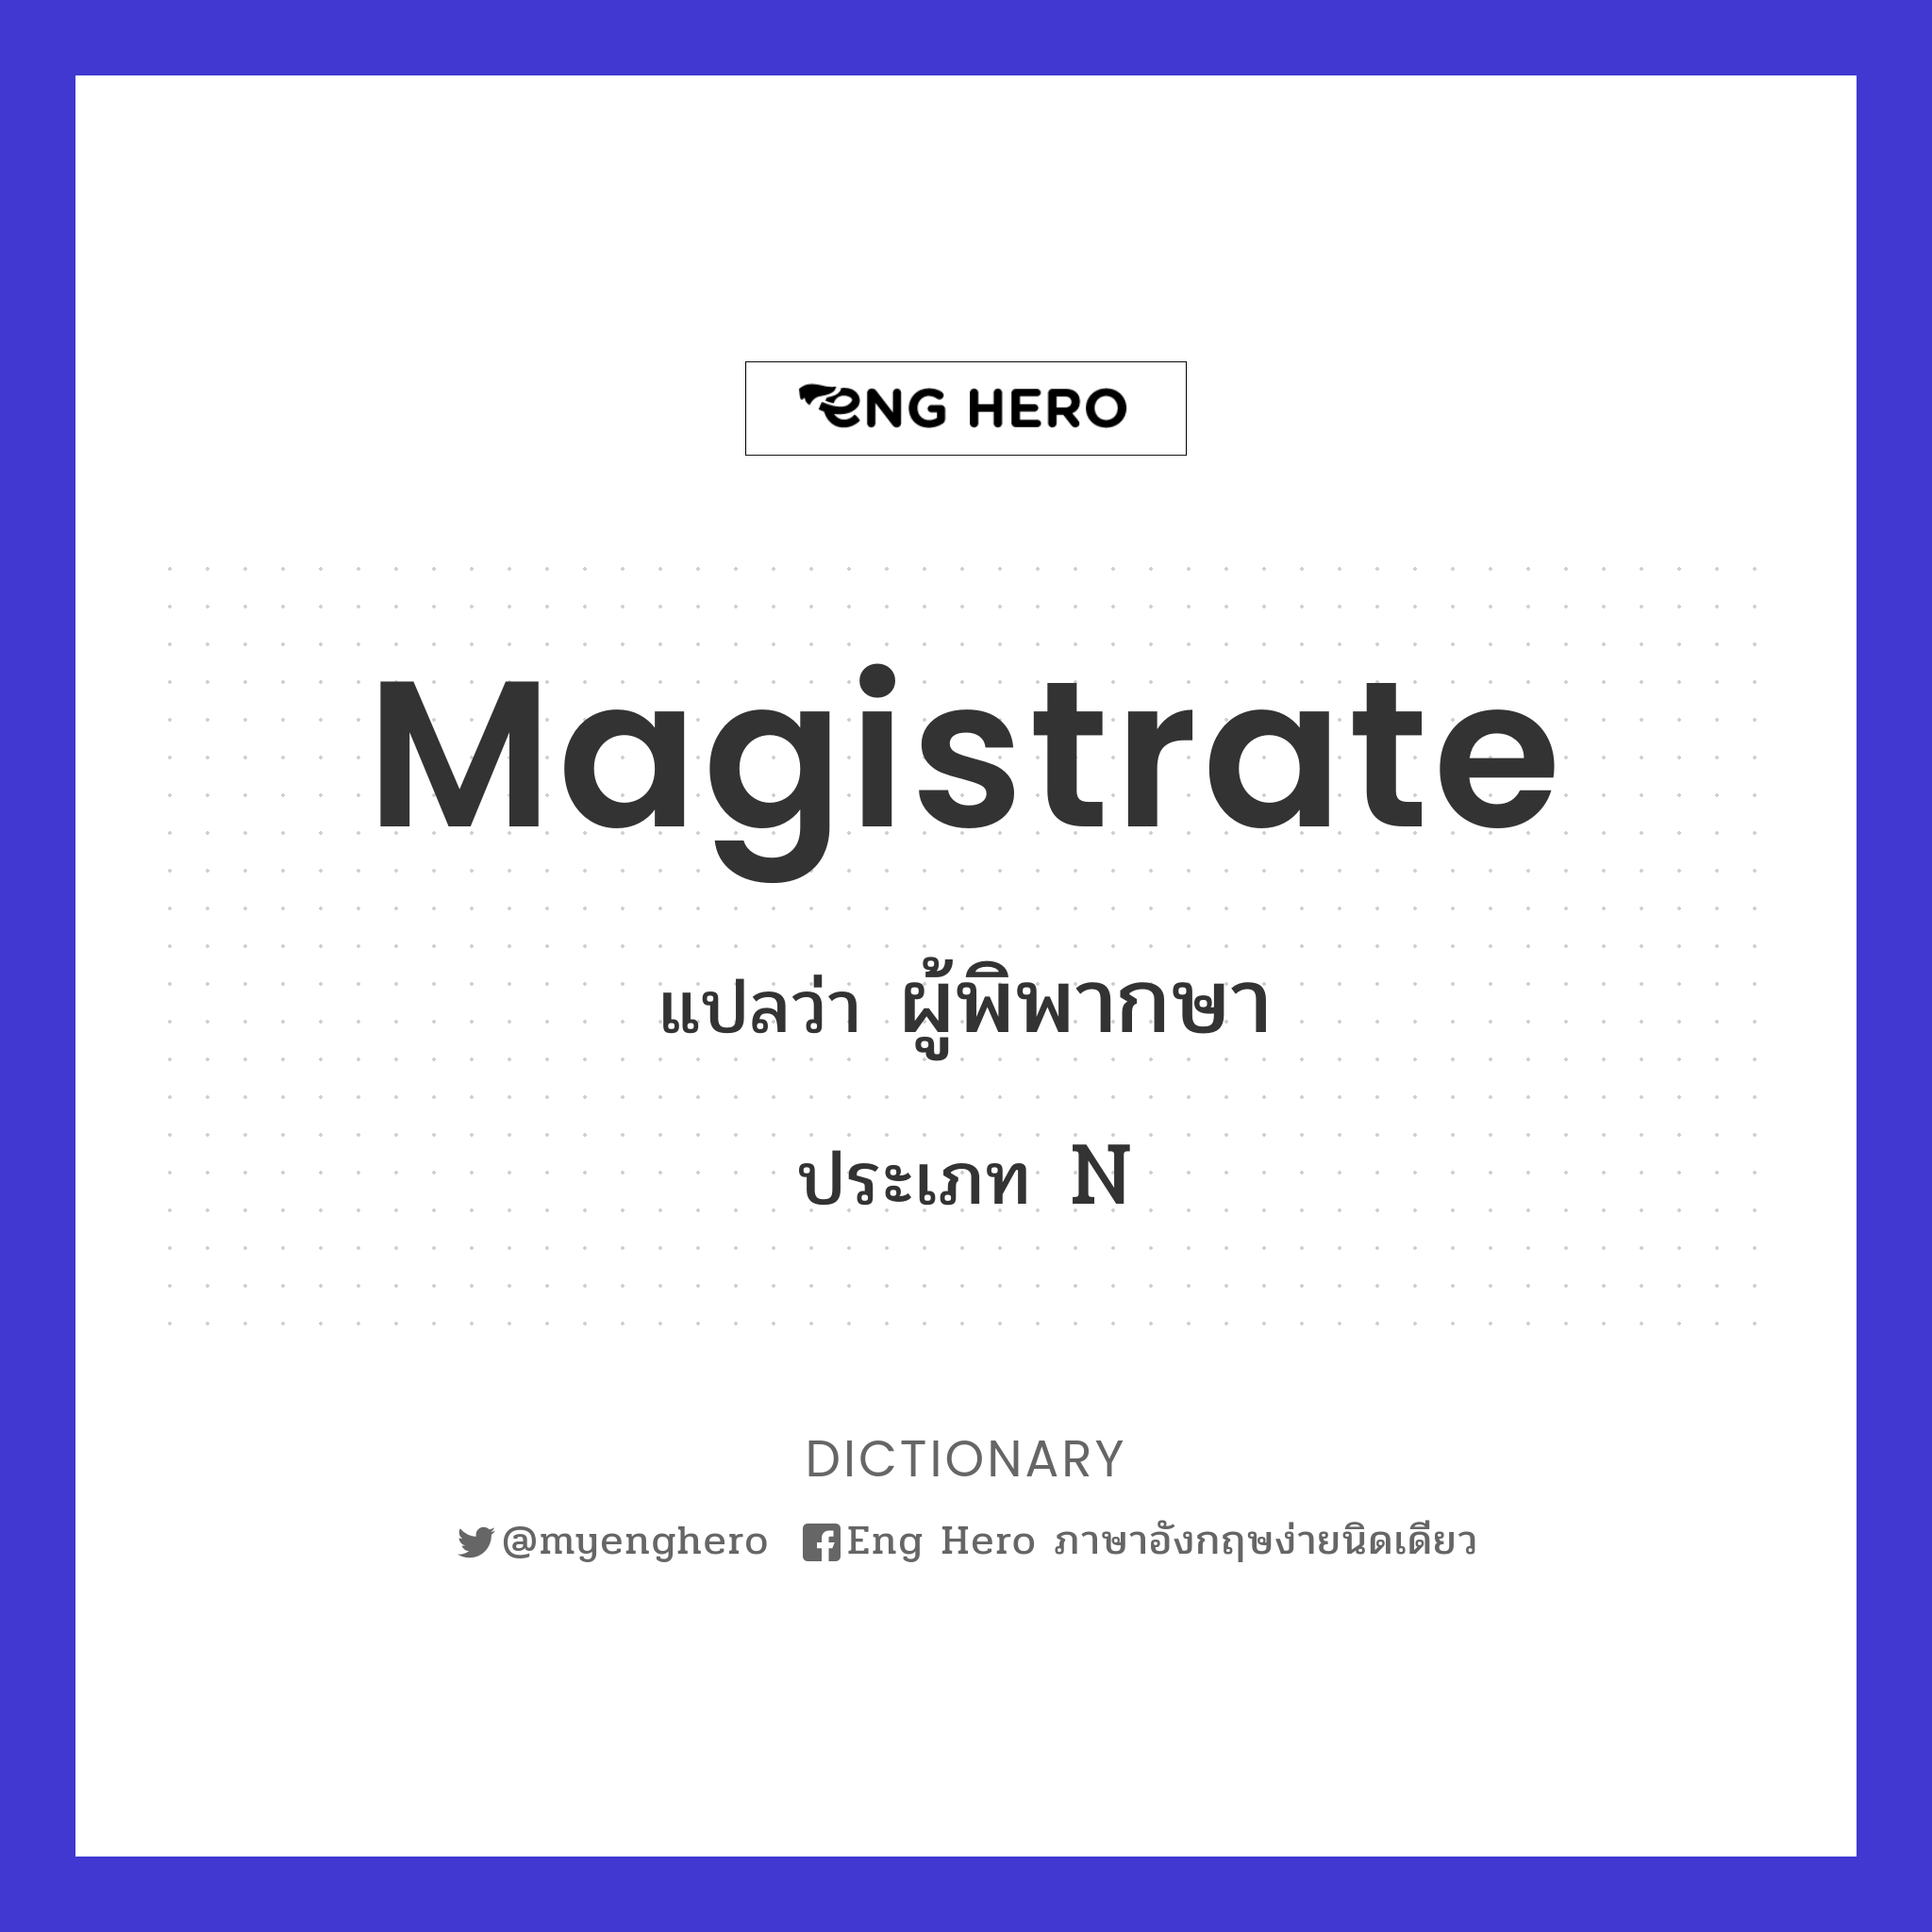 magistrate